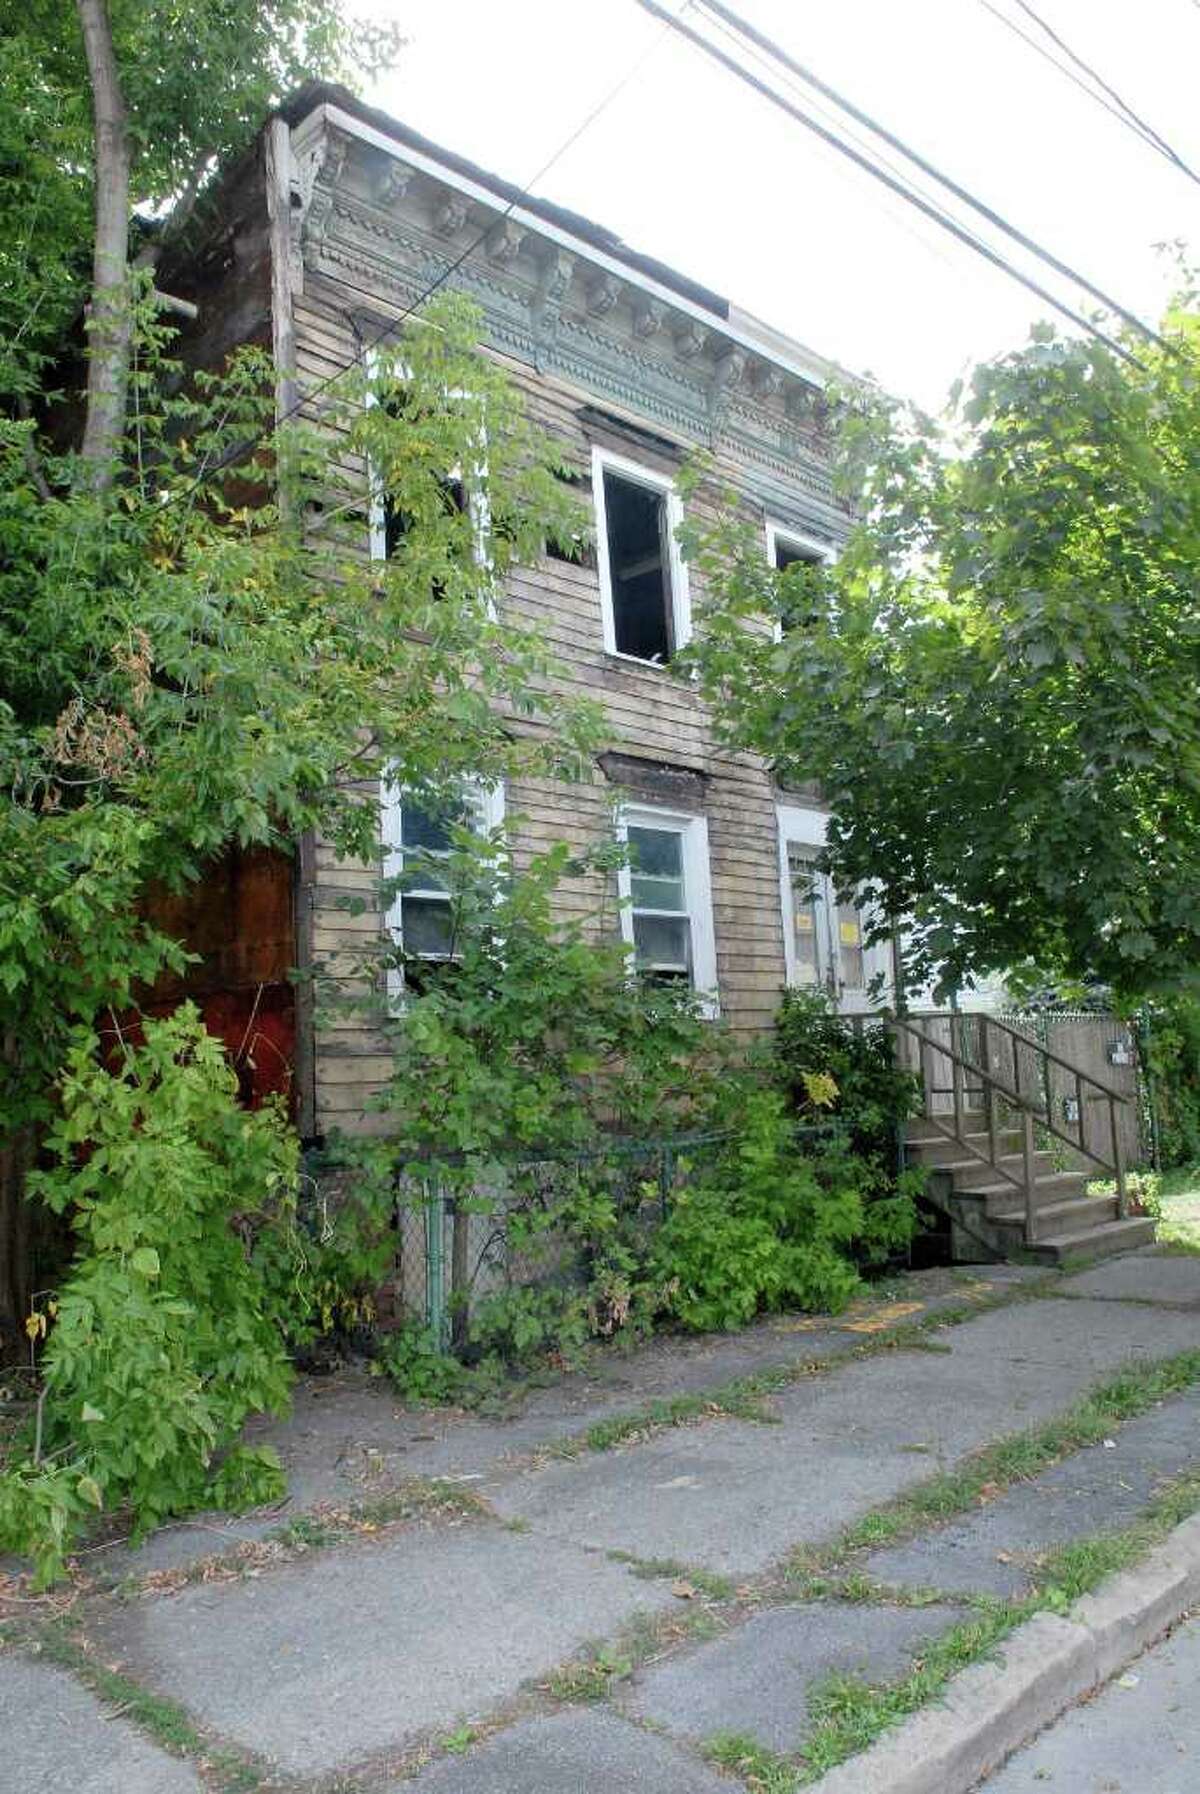 A view of the condemned building at 198 Orange St. in Albany, NY on Tuesday, Aug. 17, 2010. Some 90 cats have been removed from this building over the past few months. (Paul Buckowski / Times Union)